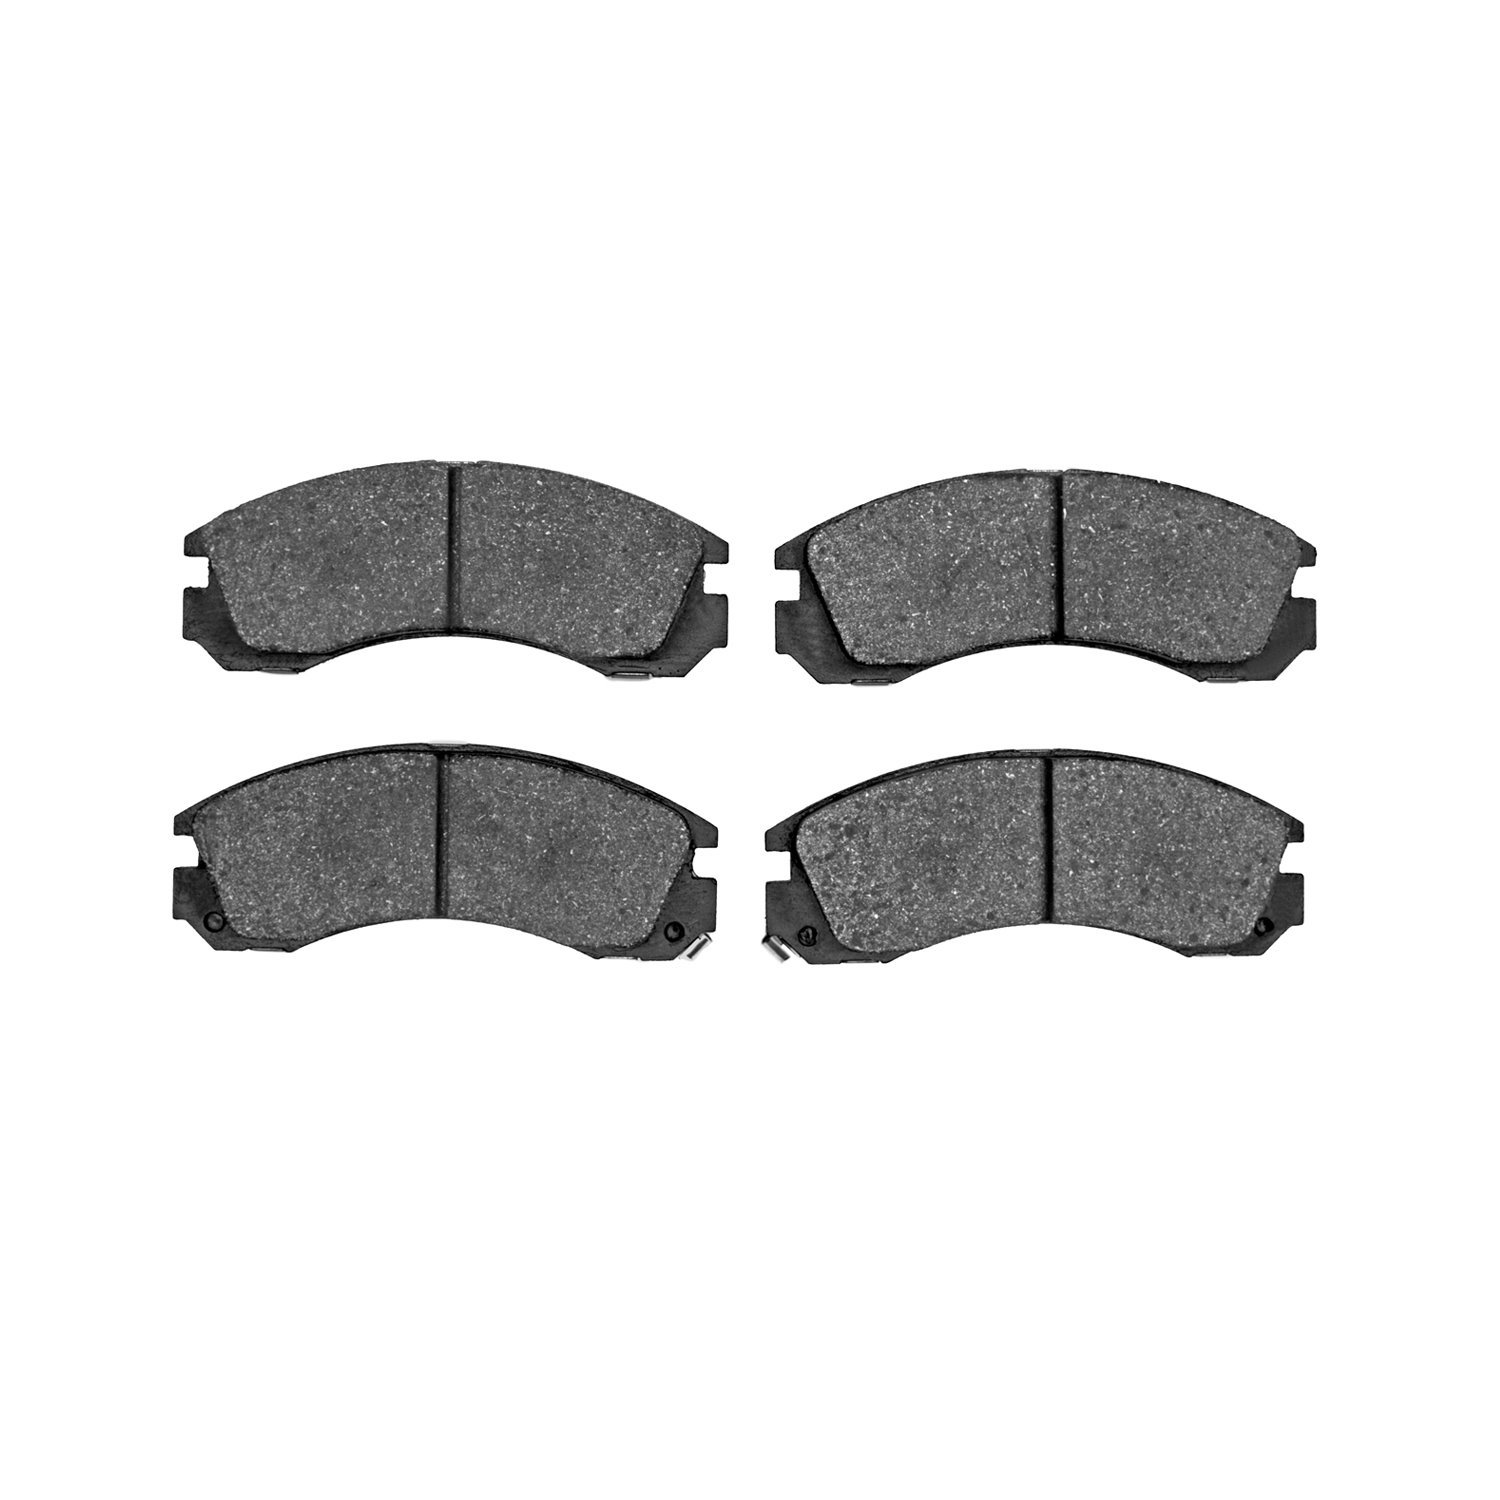 1311-0530-00 3000-Series Semi-Metallic Brake Pads, Fits Select Multiple Makes/Models, Position: Front